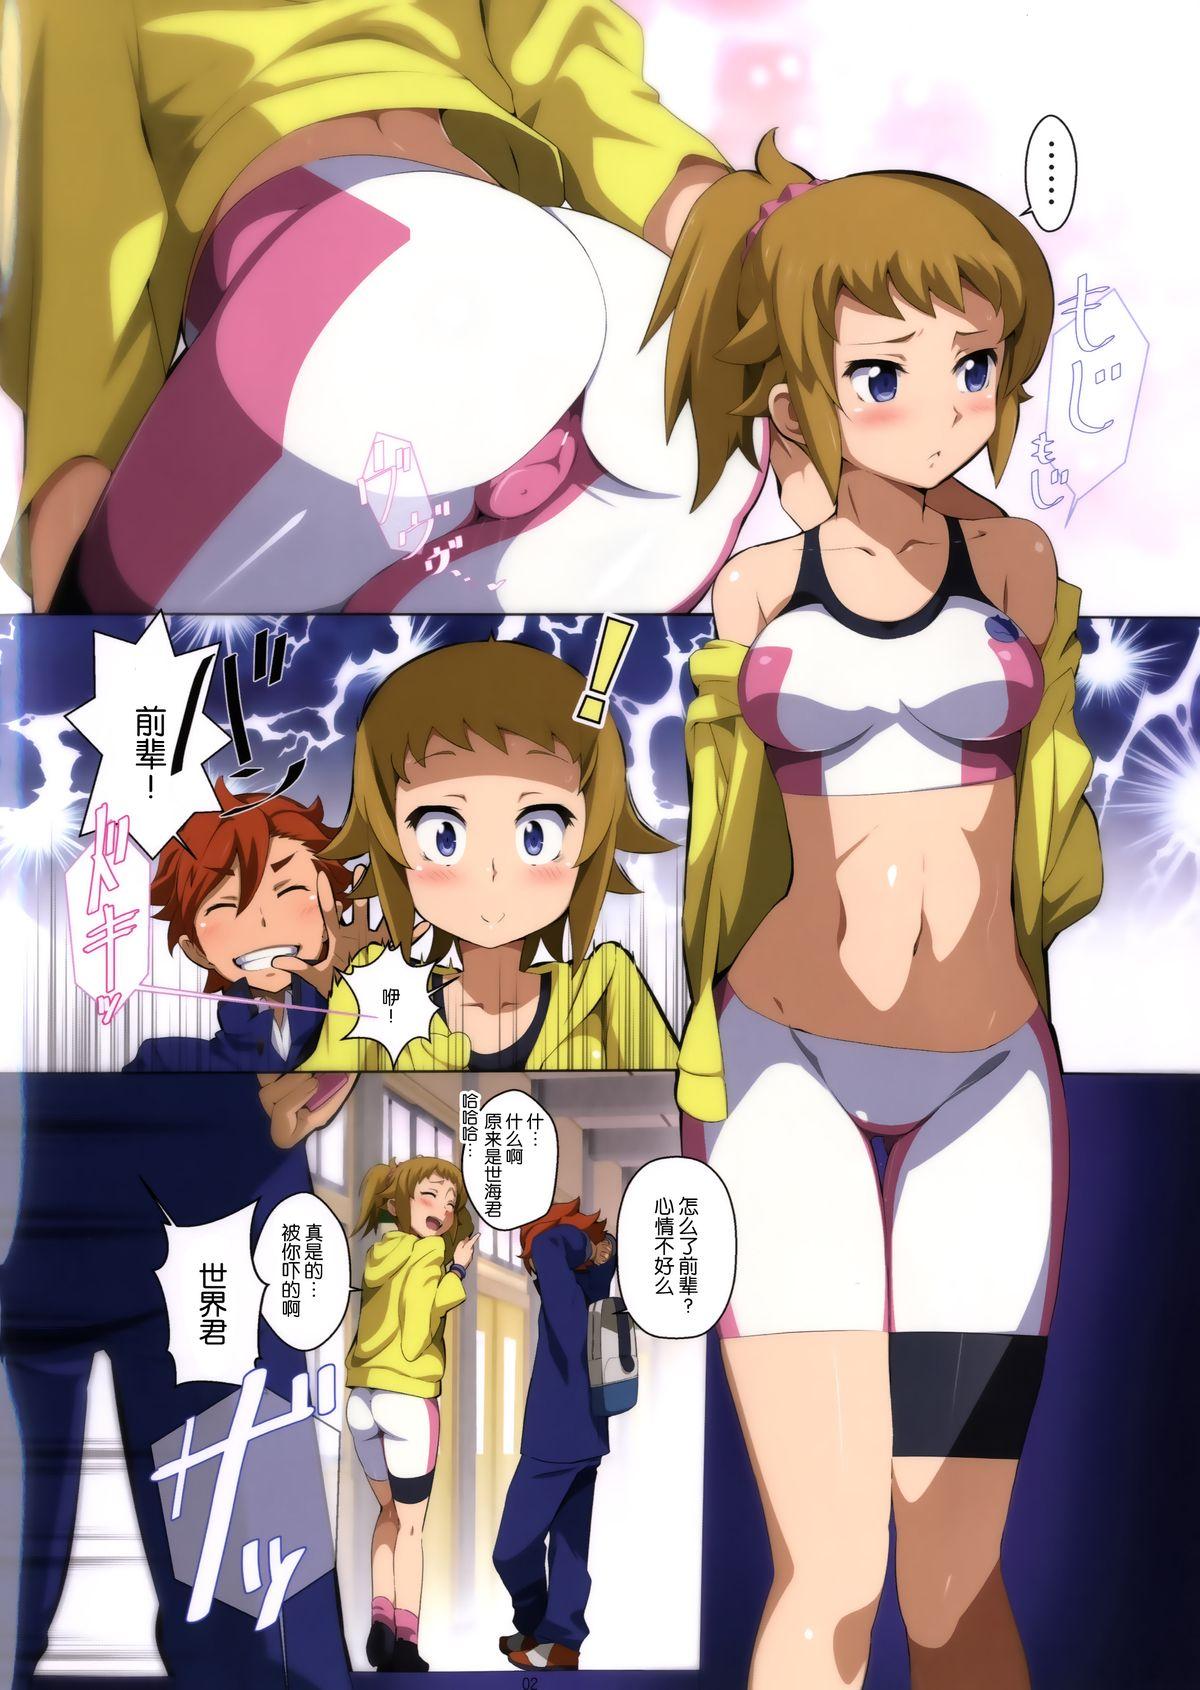 Sex BATTLE END FUMINA - Gundam build fighters try Com - Page 3